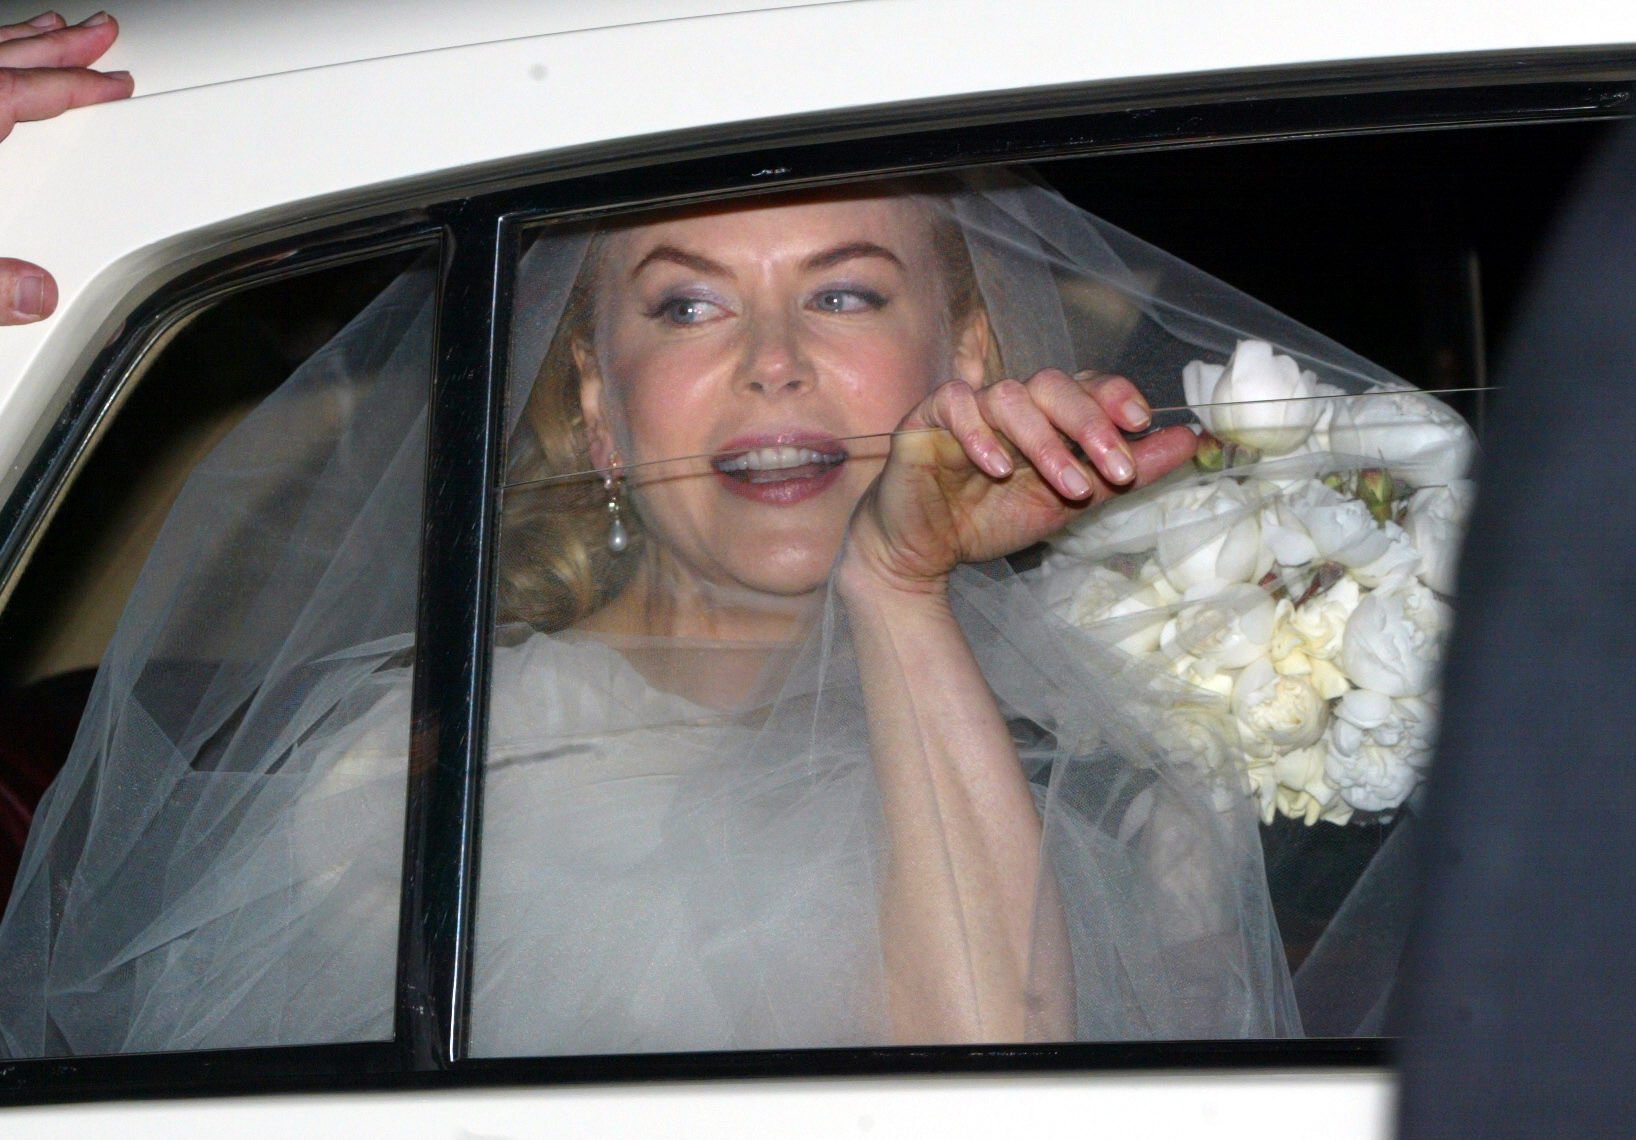 Actress Nicole Kidman leaving her home in Darling Point, Sydney, Australia to marry musician Keith Urban on 25 June 2006. | Source: Getty Images 